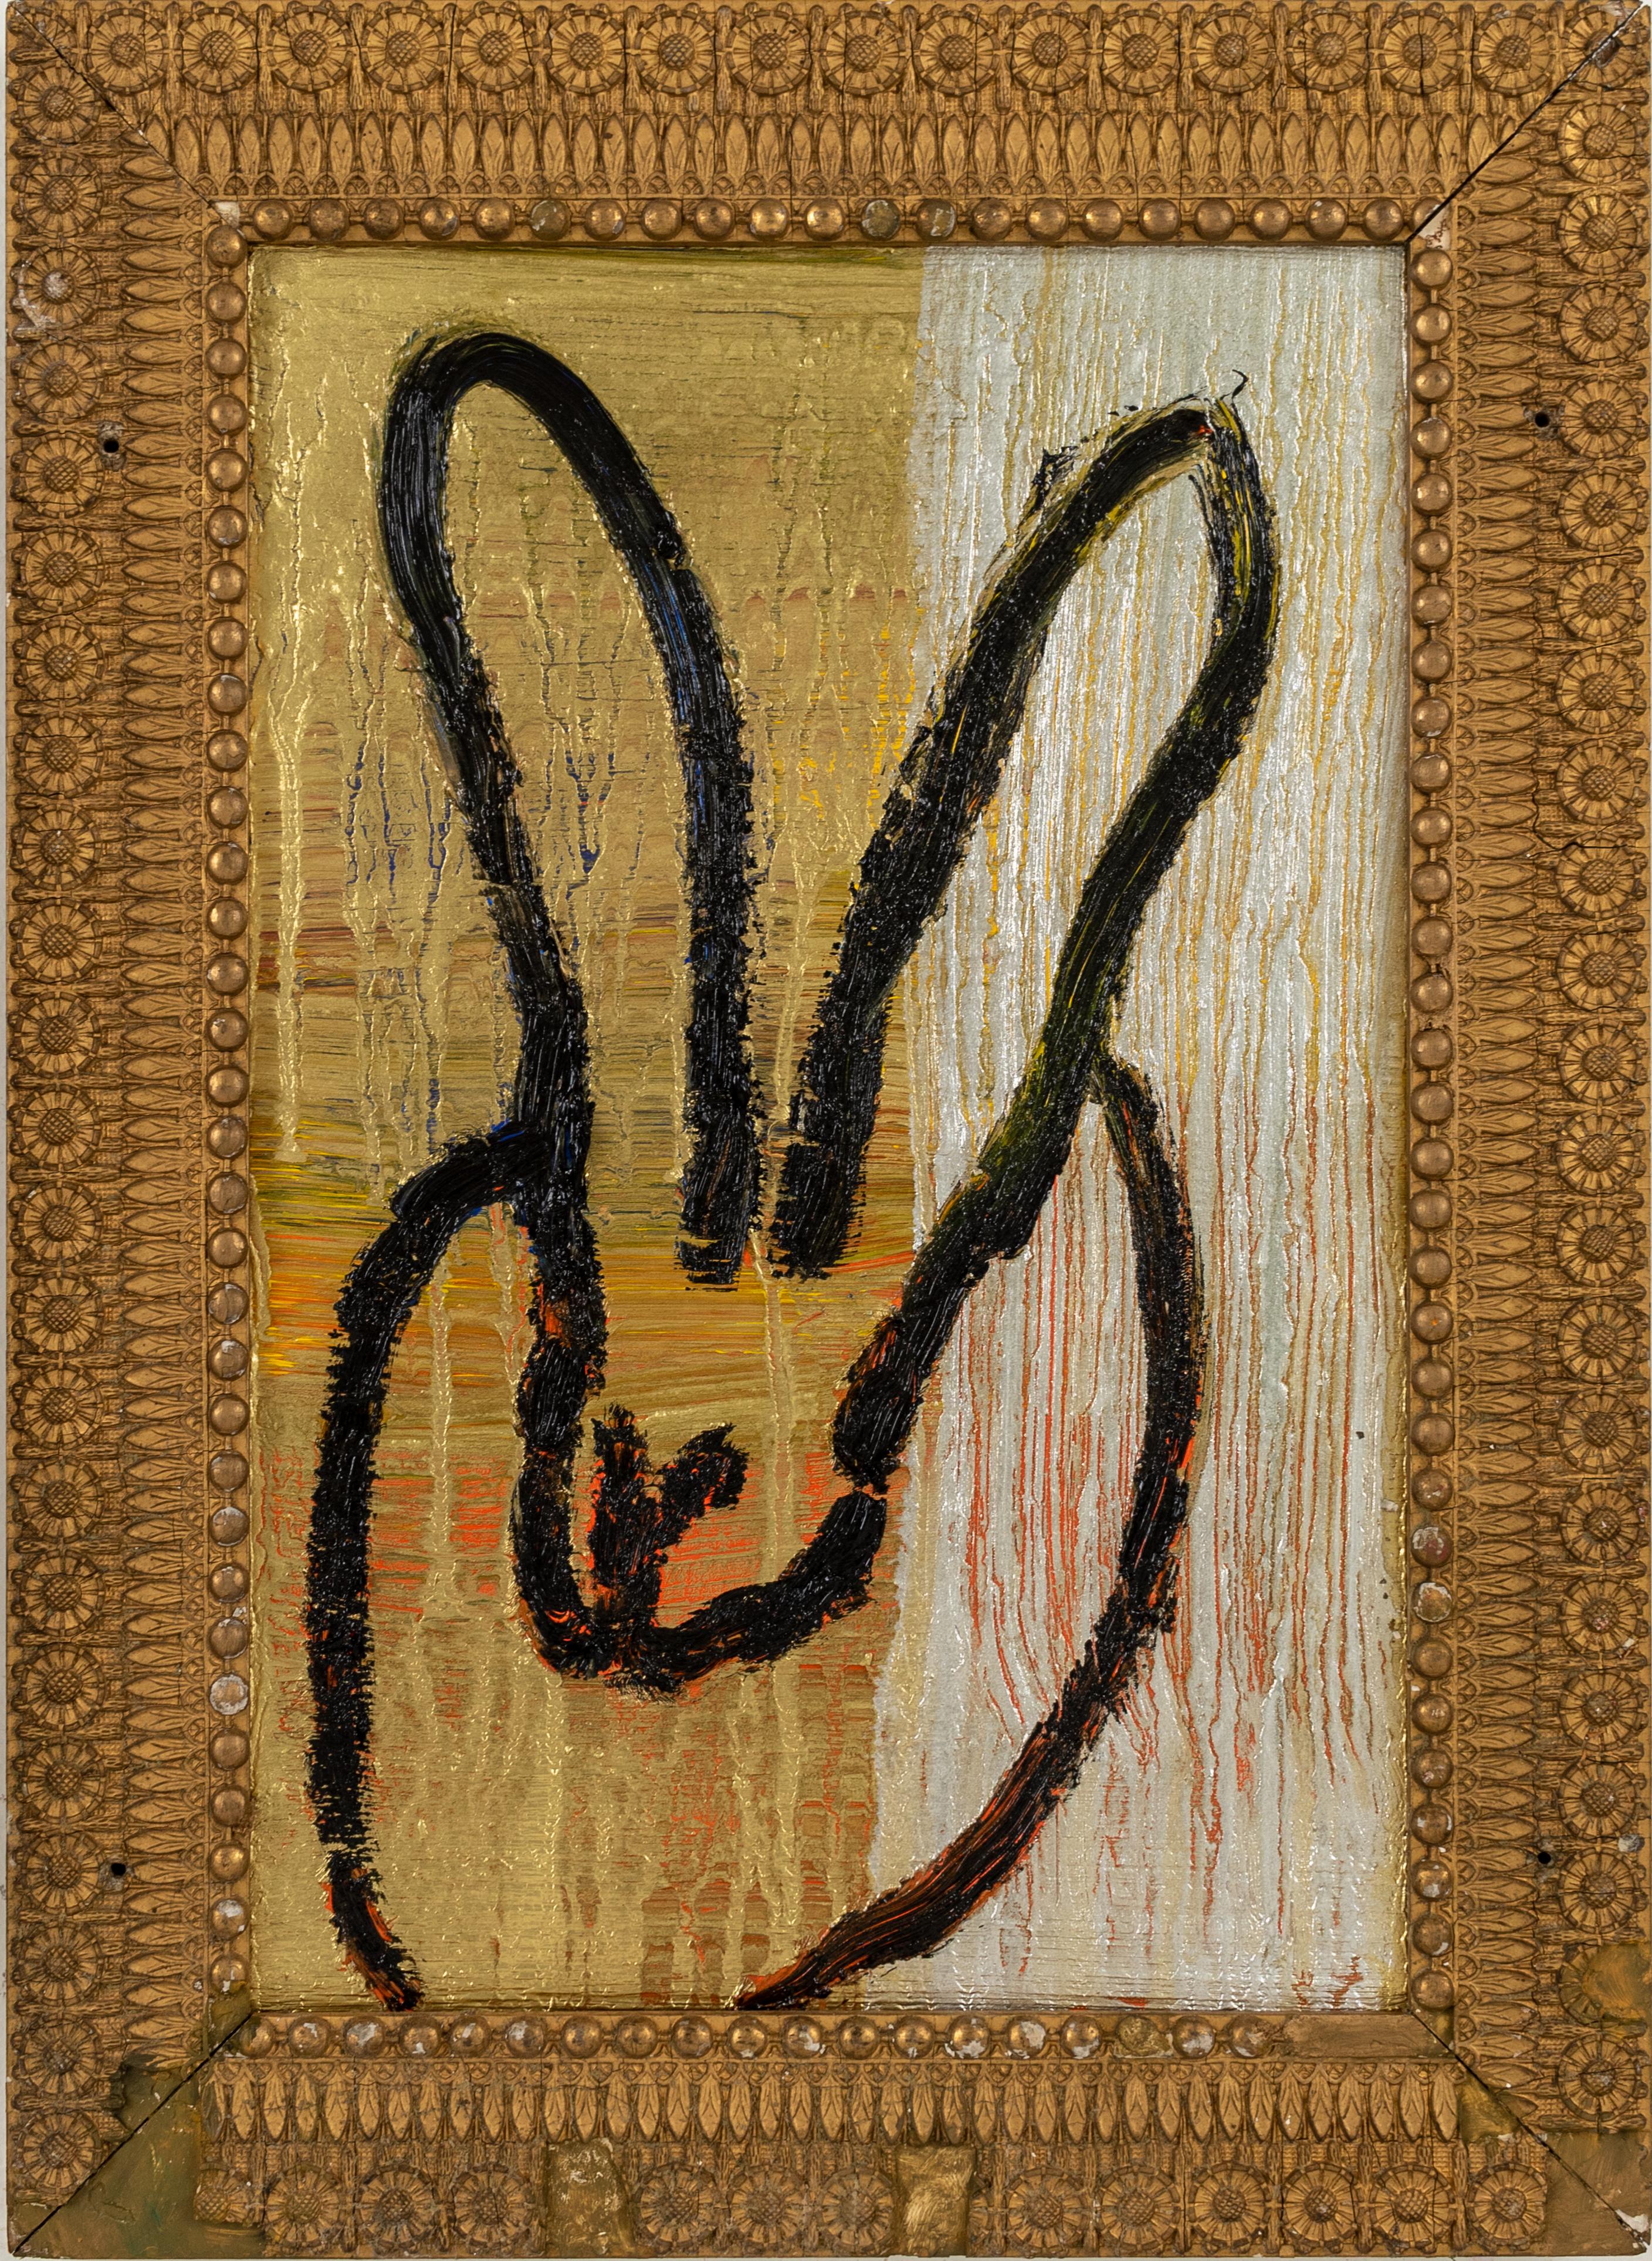 Hunt Slonem "Magic Moment" Gold & Silver Metallic Bunny
Black outlined bunny on a gold, silver, and red metallic background in an antique frame

Unframed: 19 x 12.5 inches 
Framed: 23.25 x 17 inches 
*Painting is framed - Please note that not all